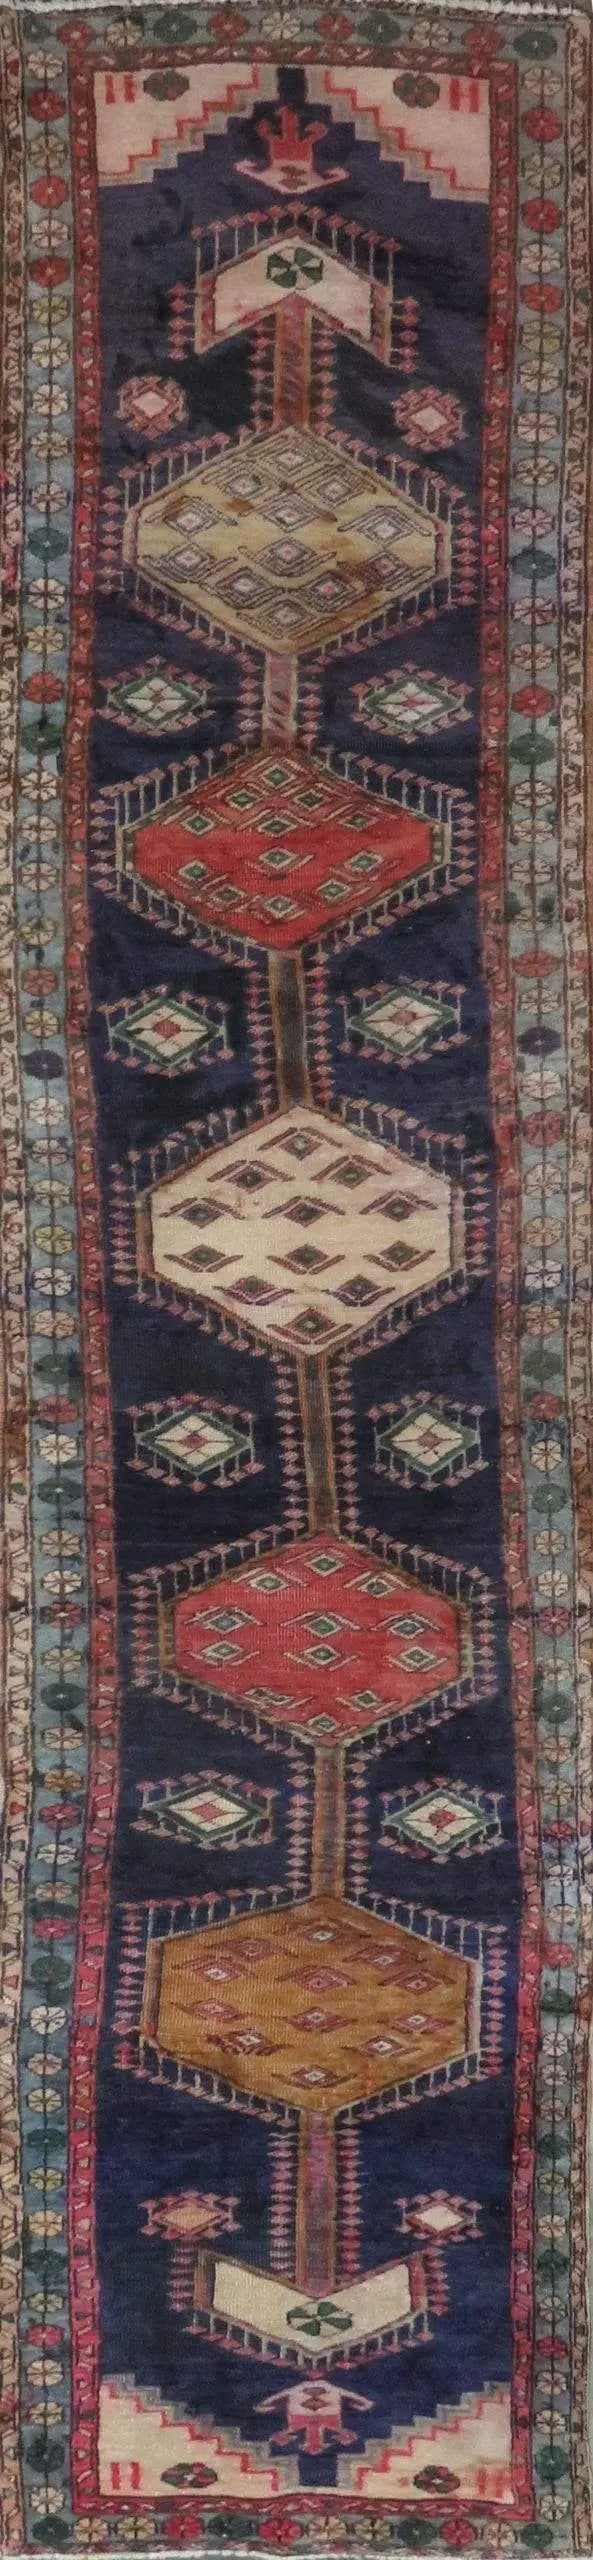 Hand-Knotted Vintage Rug 13'6" x 2'7"